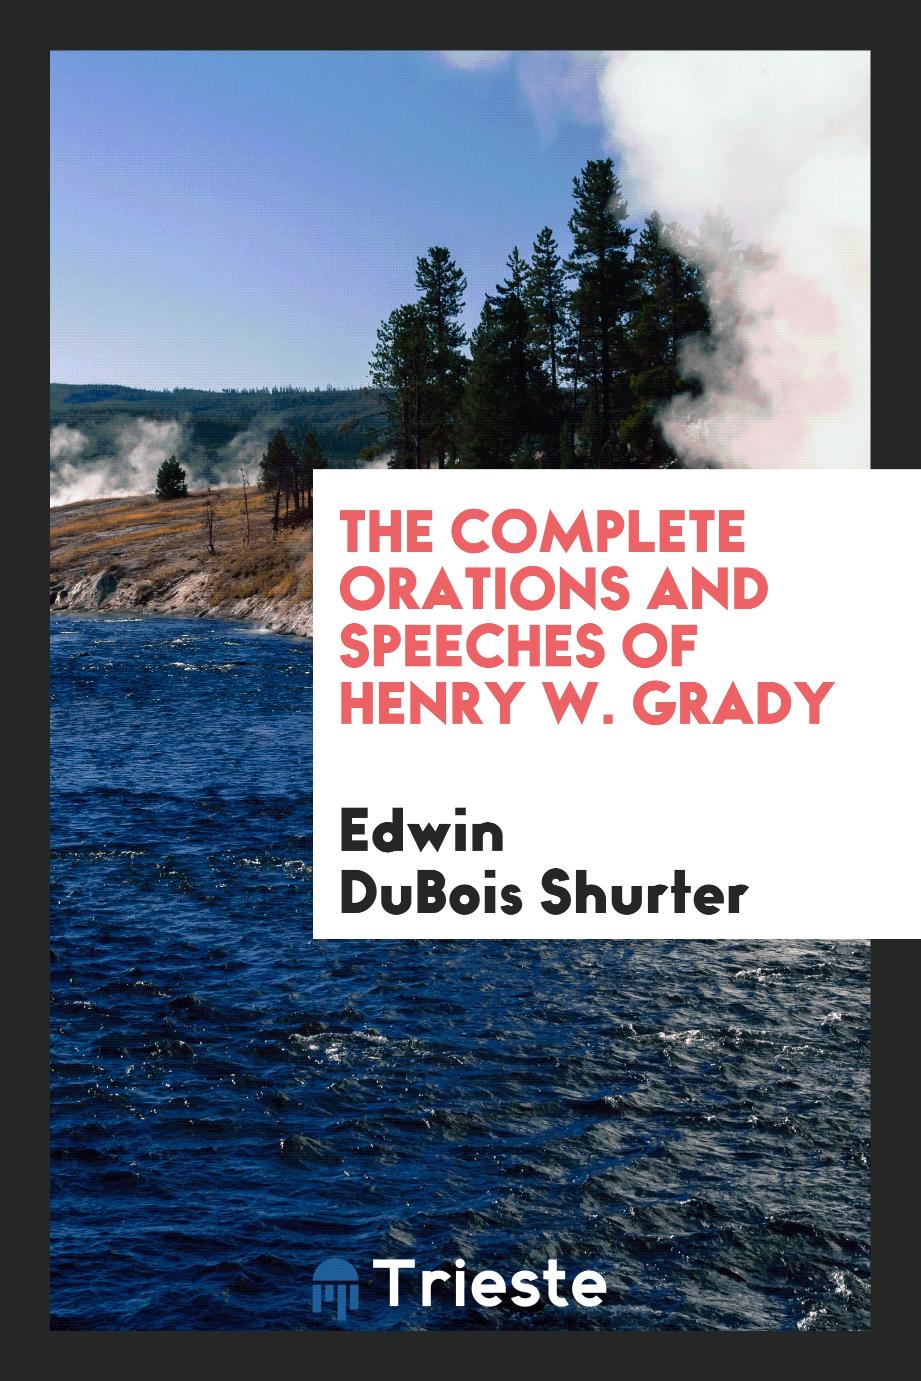 The complete orations and speeches of Henry W. Grady